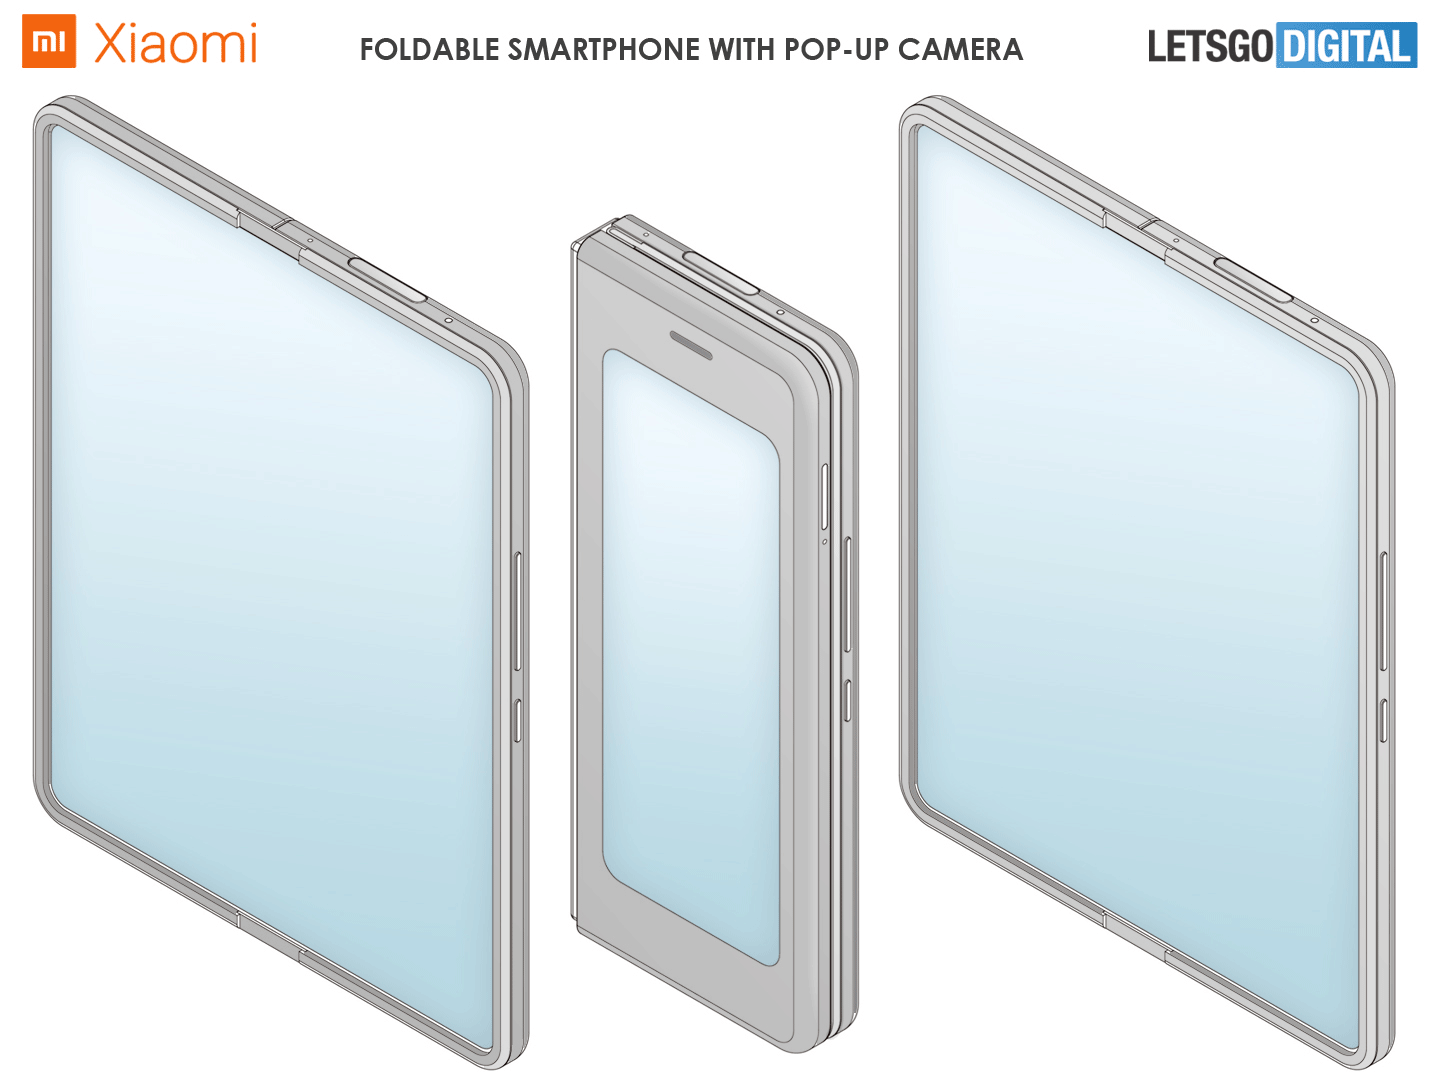 Xiaomi patents a foldable smartphone with a pop up camera